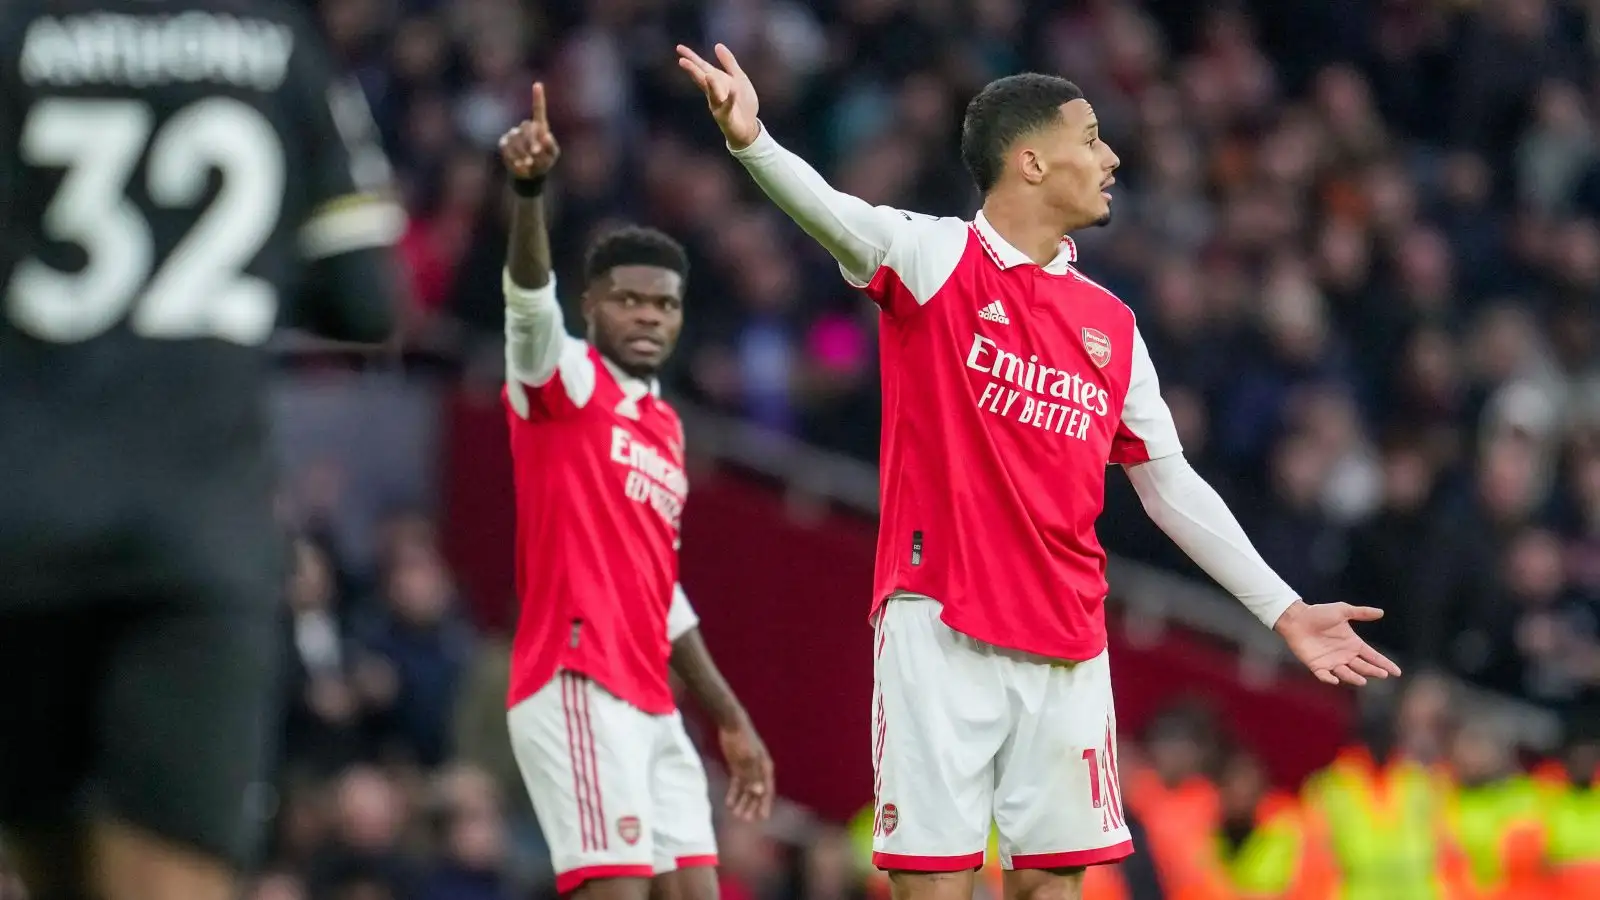 Arsenal duo William Saliba and Thomas Partey gesture during a match against Bournemouth